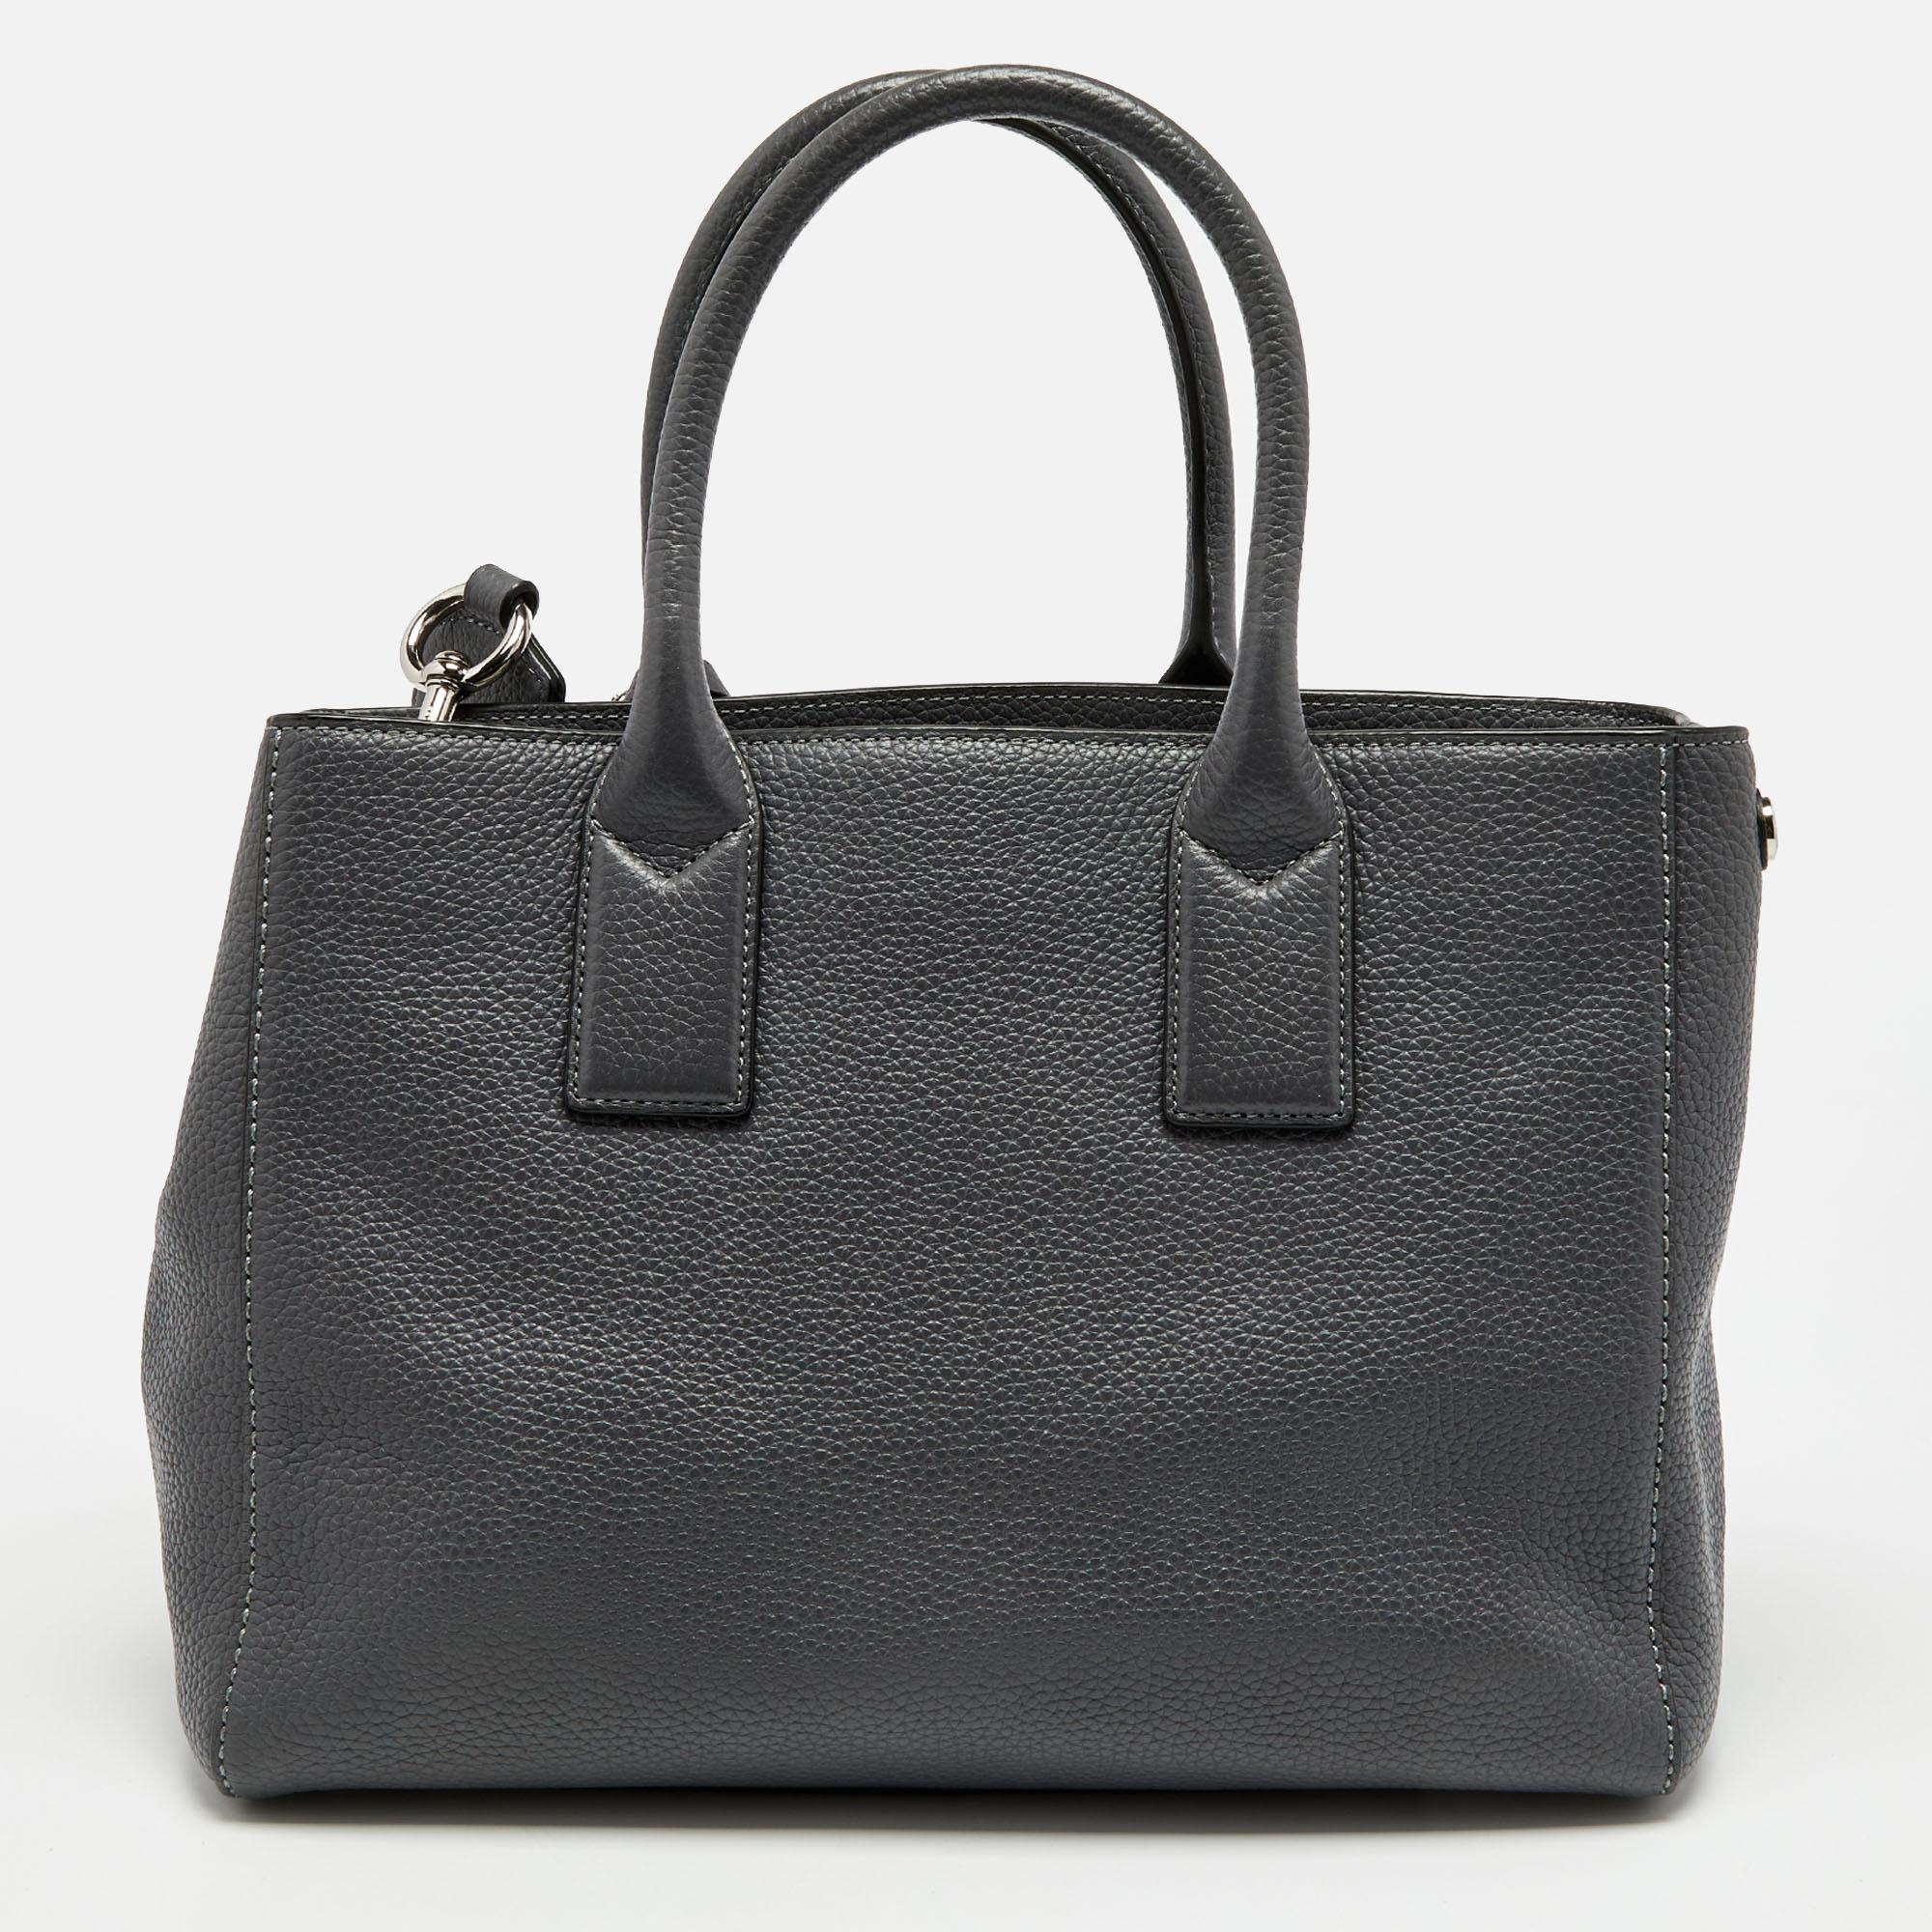 Complete your look instantly with this wonderful Marc Jacobs tote. Crafted from leather, the grey bag is a versatile creation to own. The interior is lined with canvas, and the bag flaunts a zip pocket on the front. Carry it using the dual handles